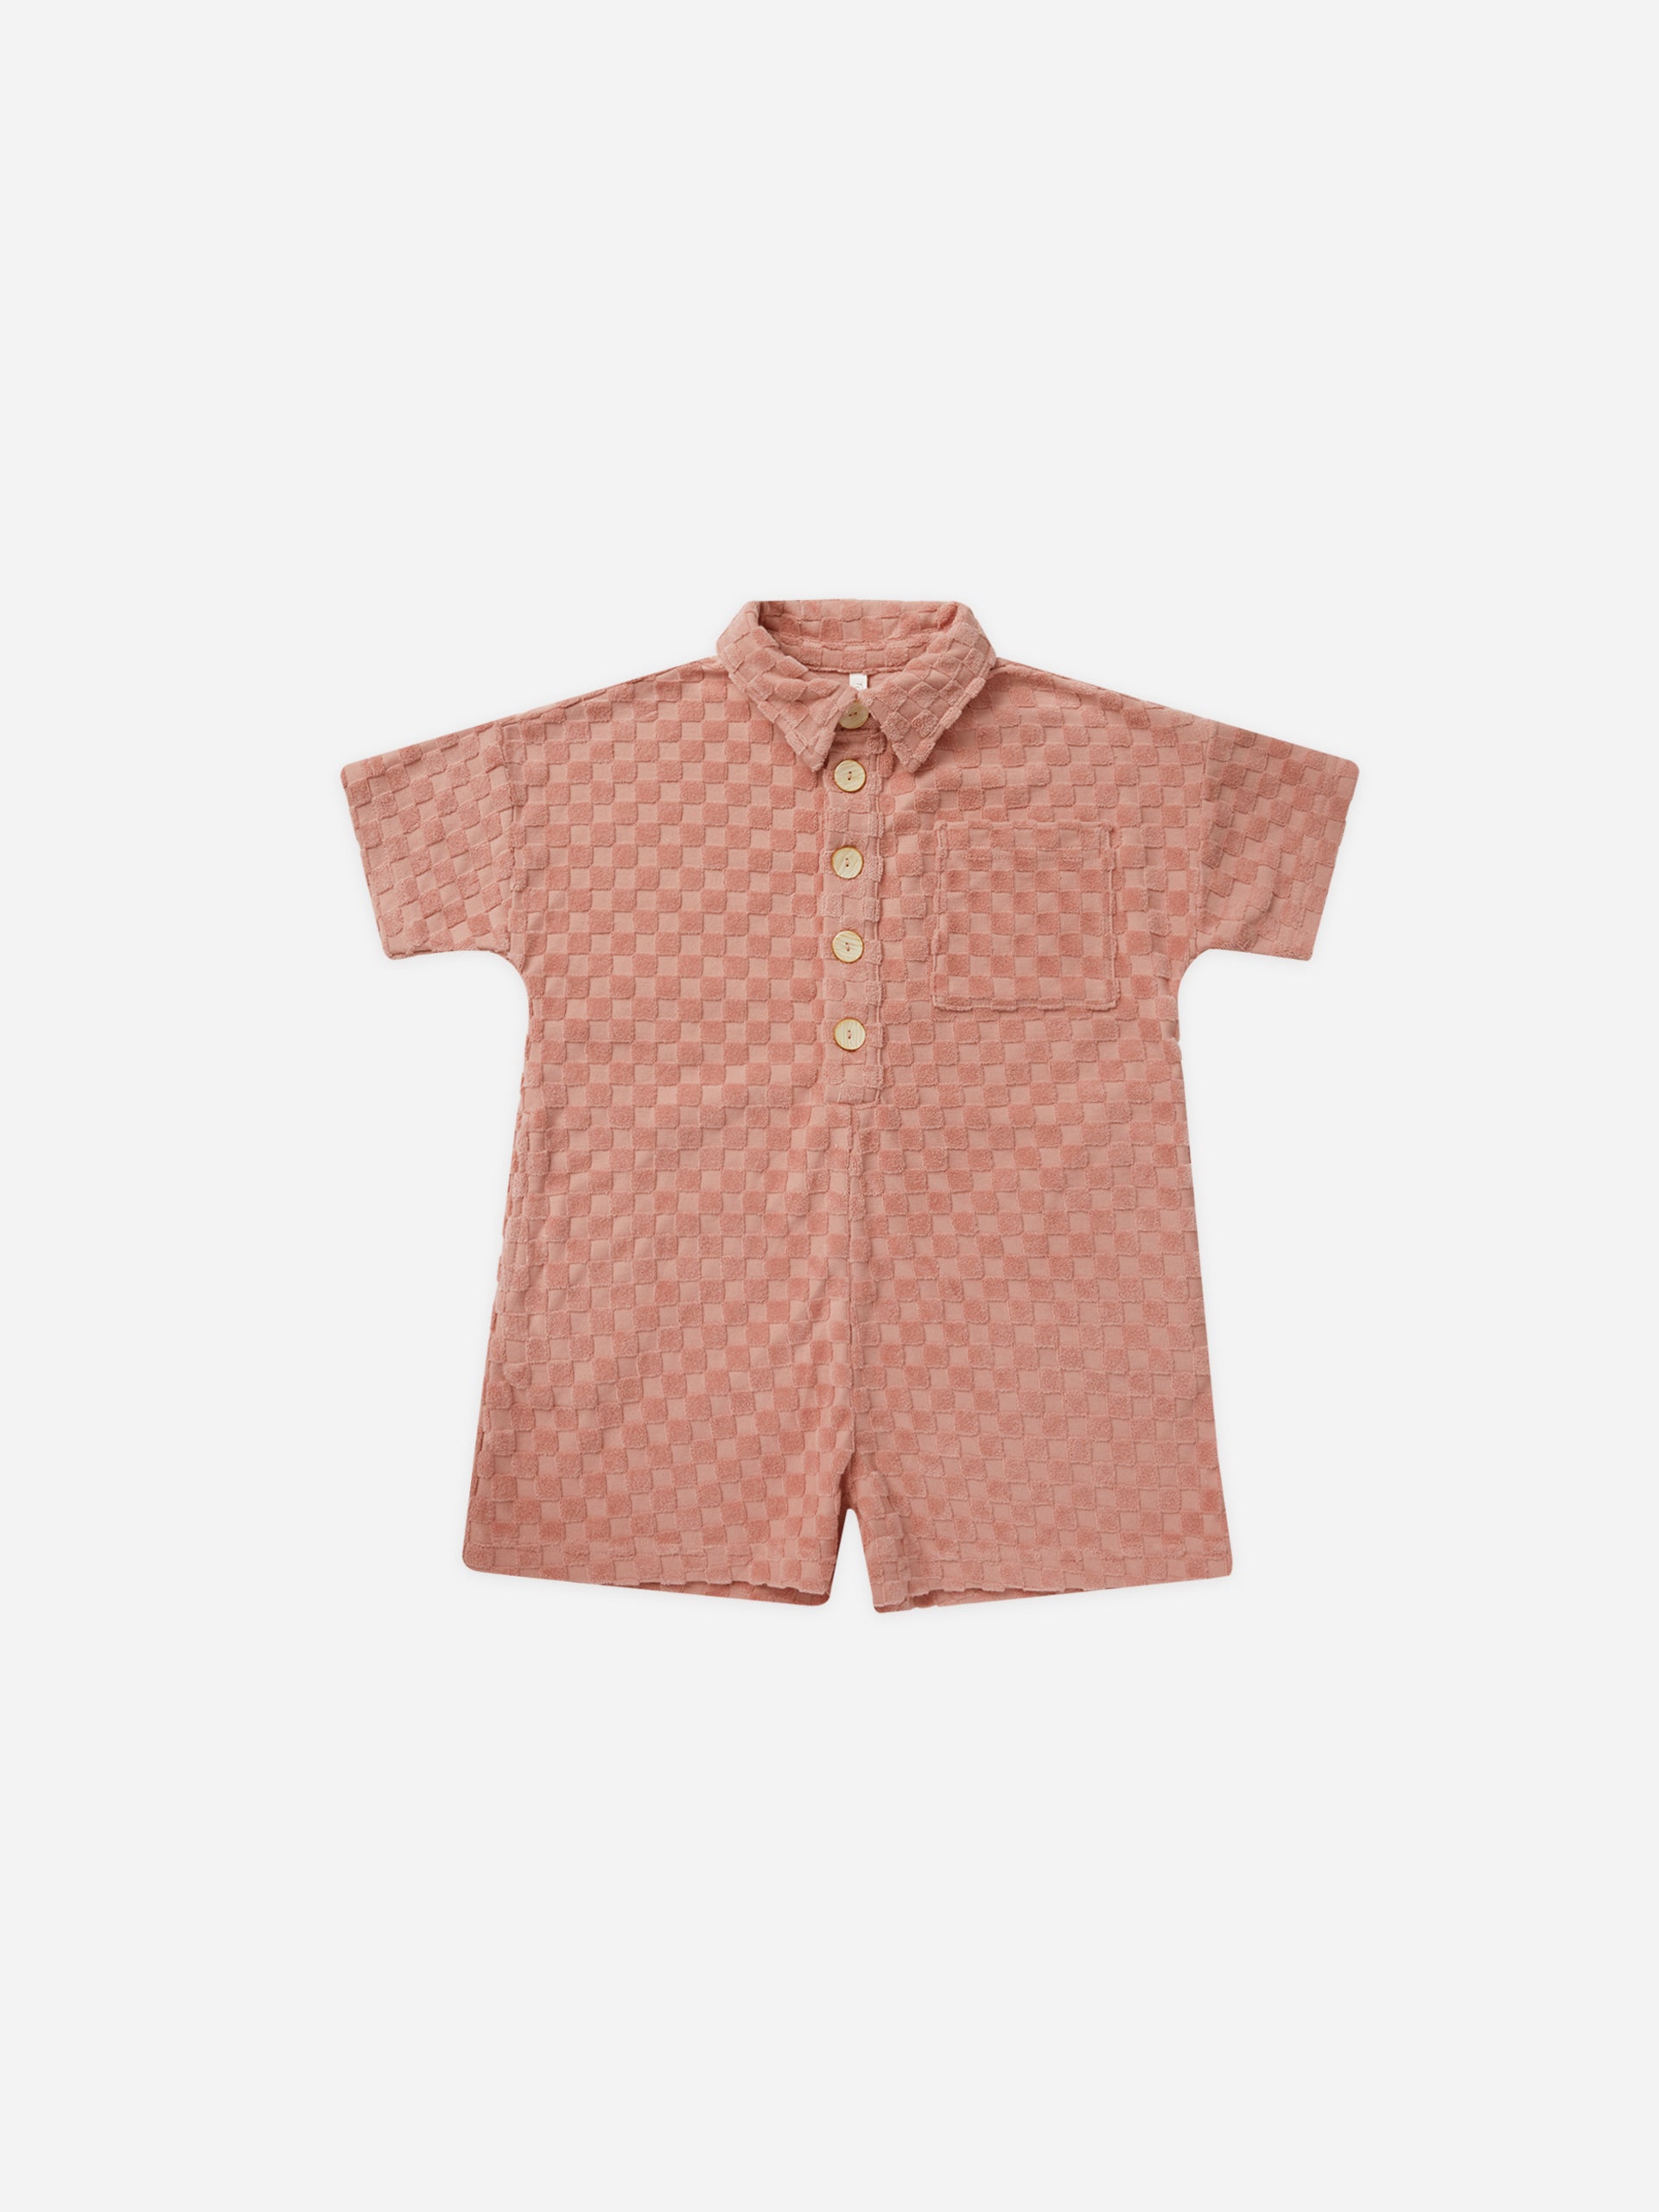 Frankie Romper || Pink Check - Rylee + Cru | Kids Clothes | Trendy Baby Clothes | Modern Infant Outfits |